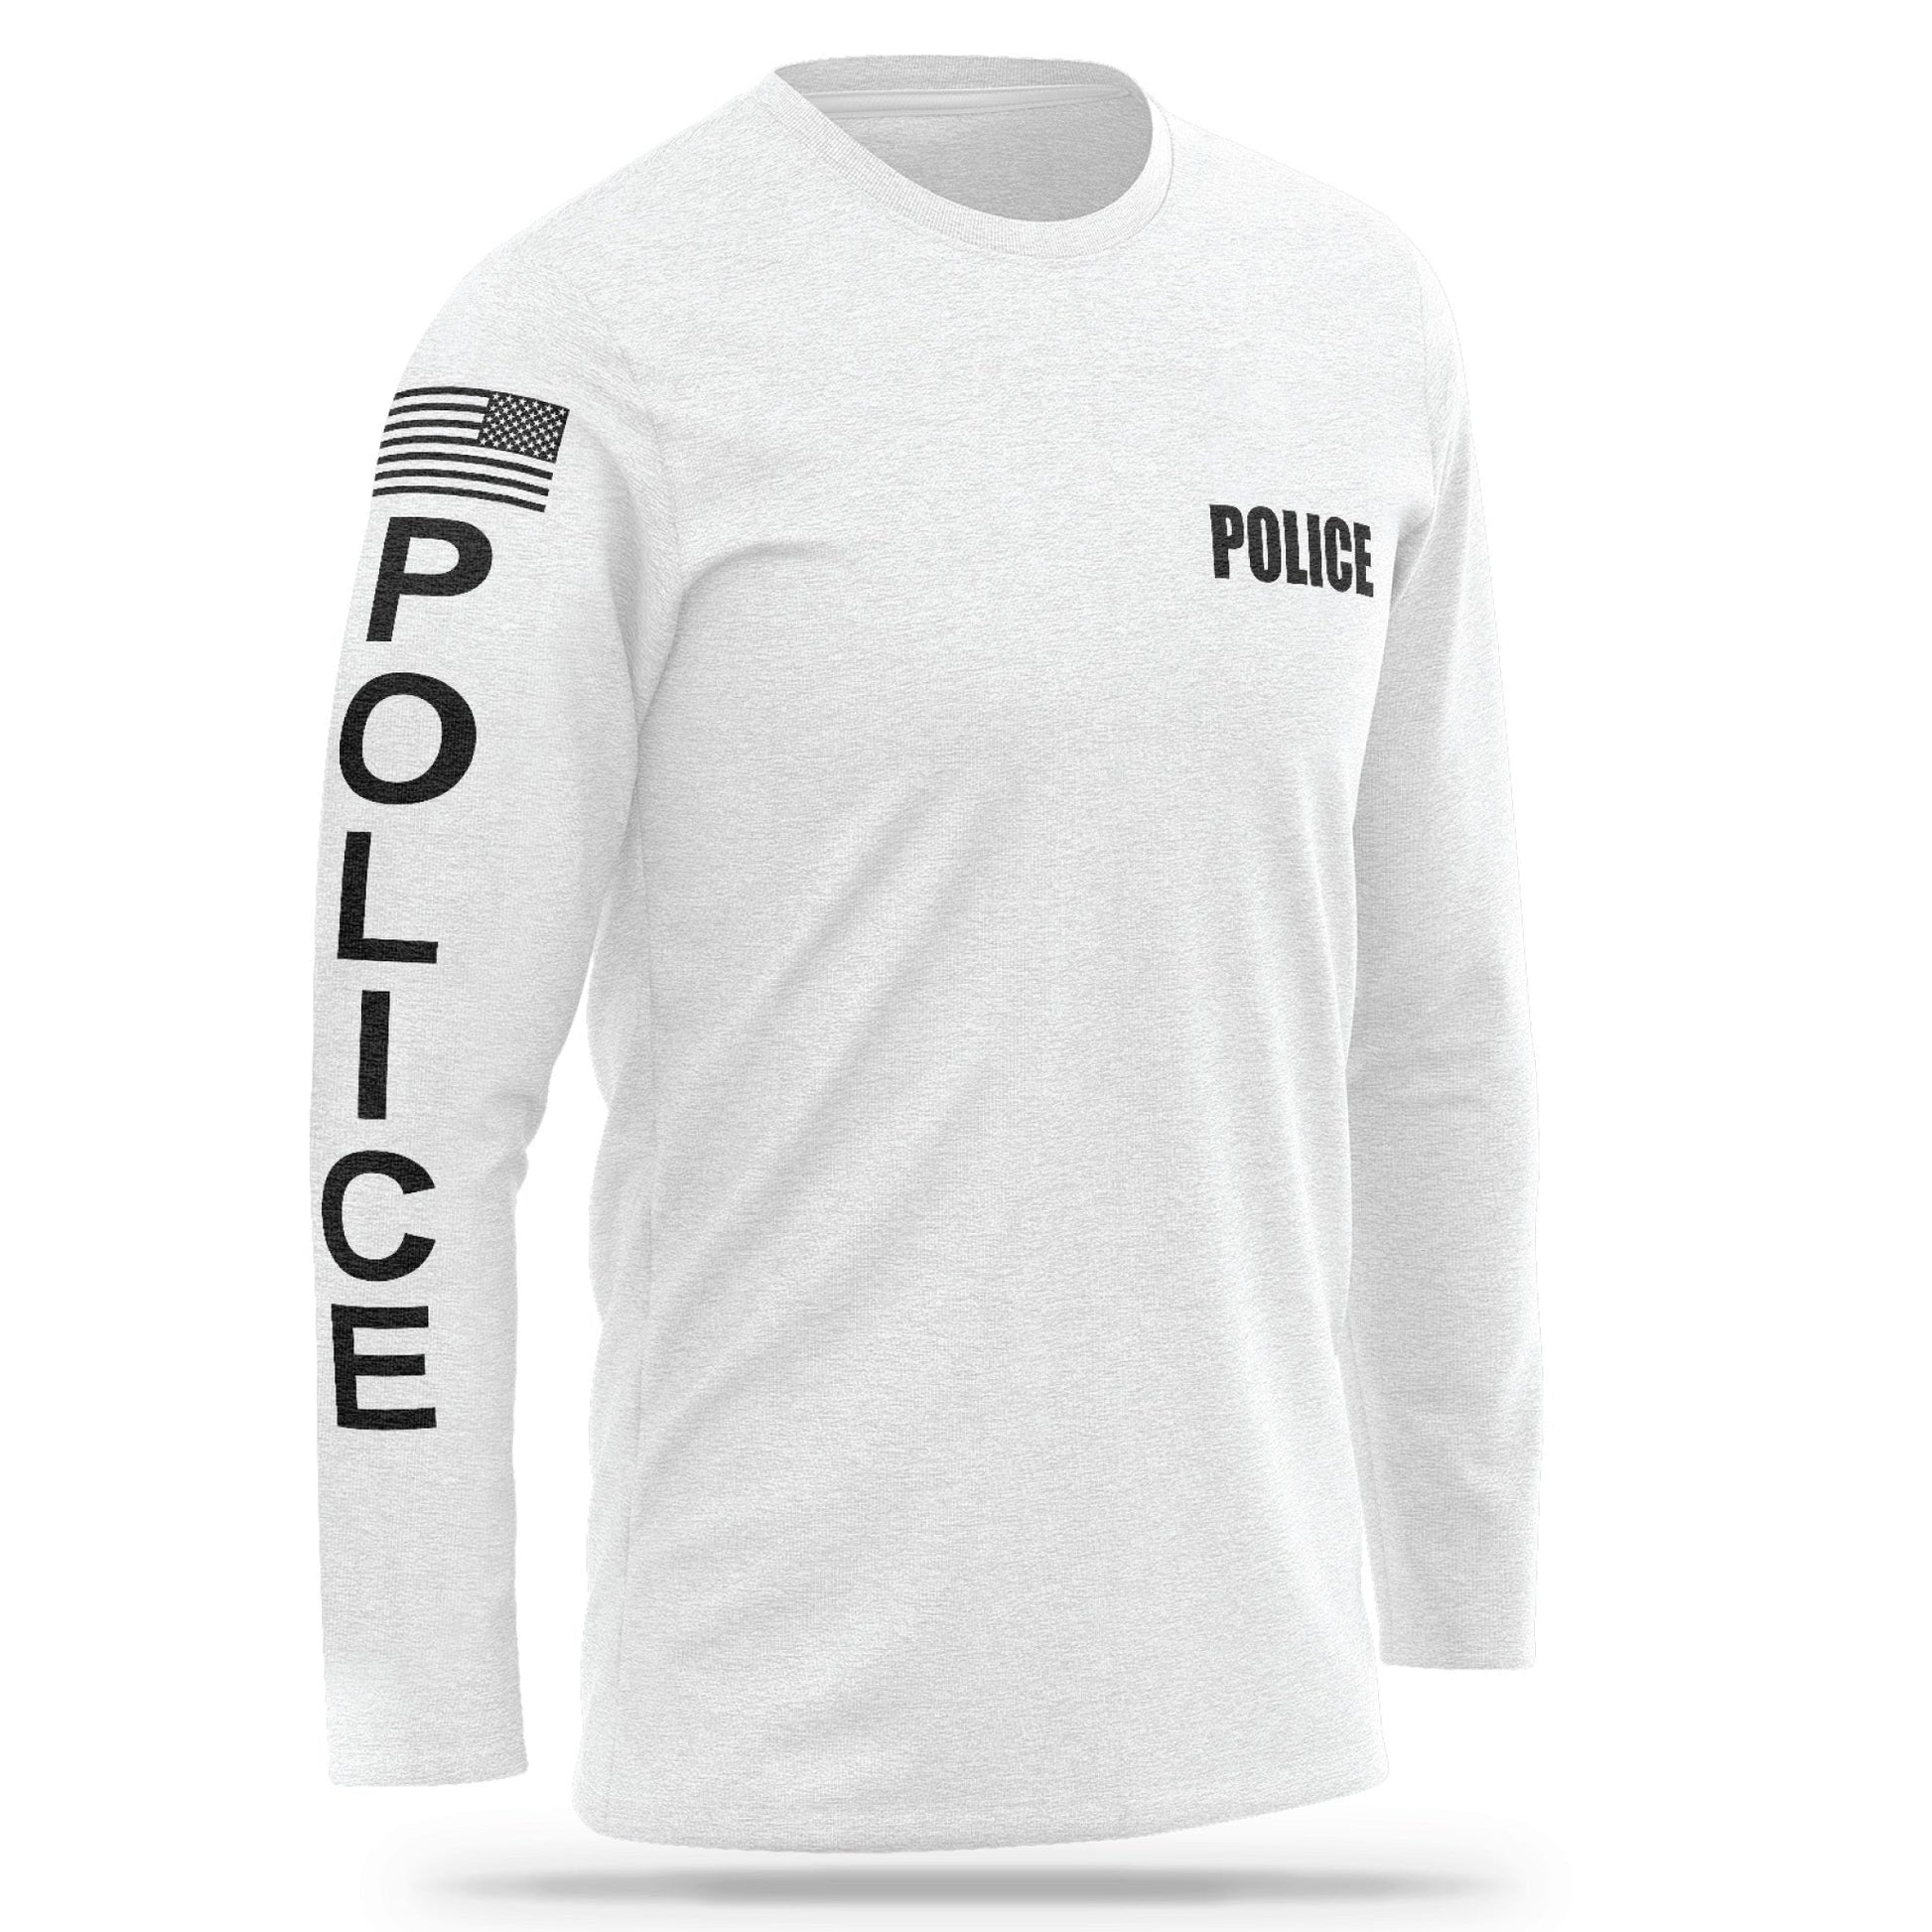 [POLICE] Cotton Blend Long Sleeve [WHT/BLK]-13 Fifty Apparel